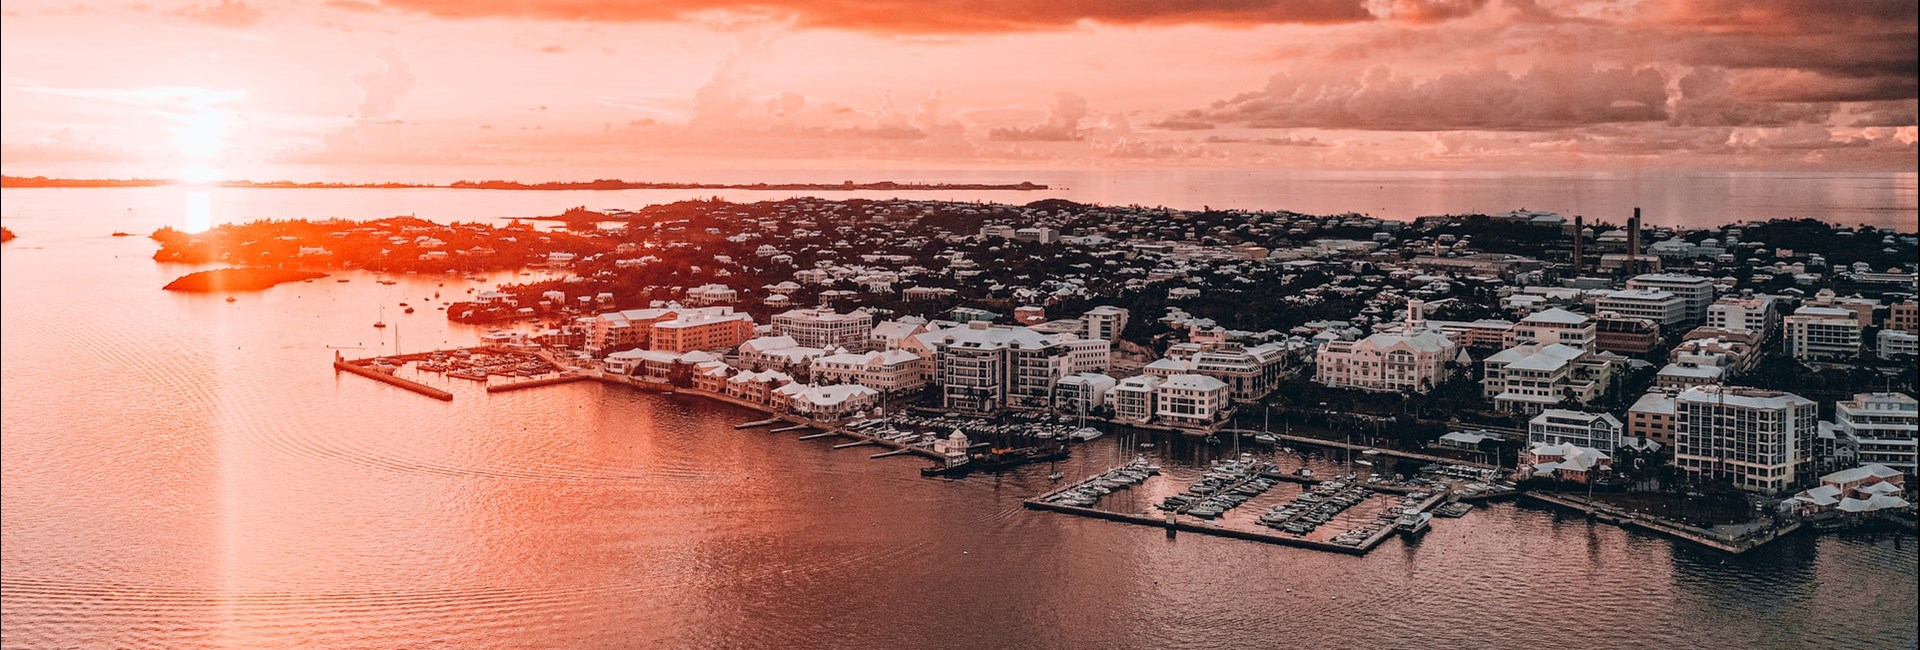 Aerial view of a red sun set in the distance above a town on the edge of an island